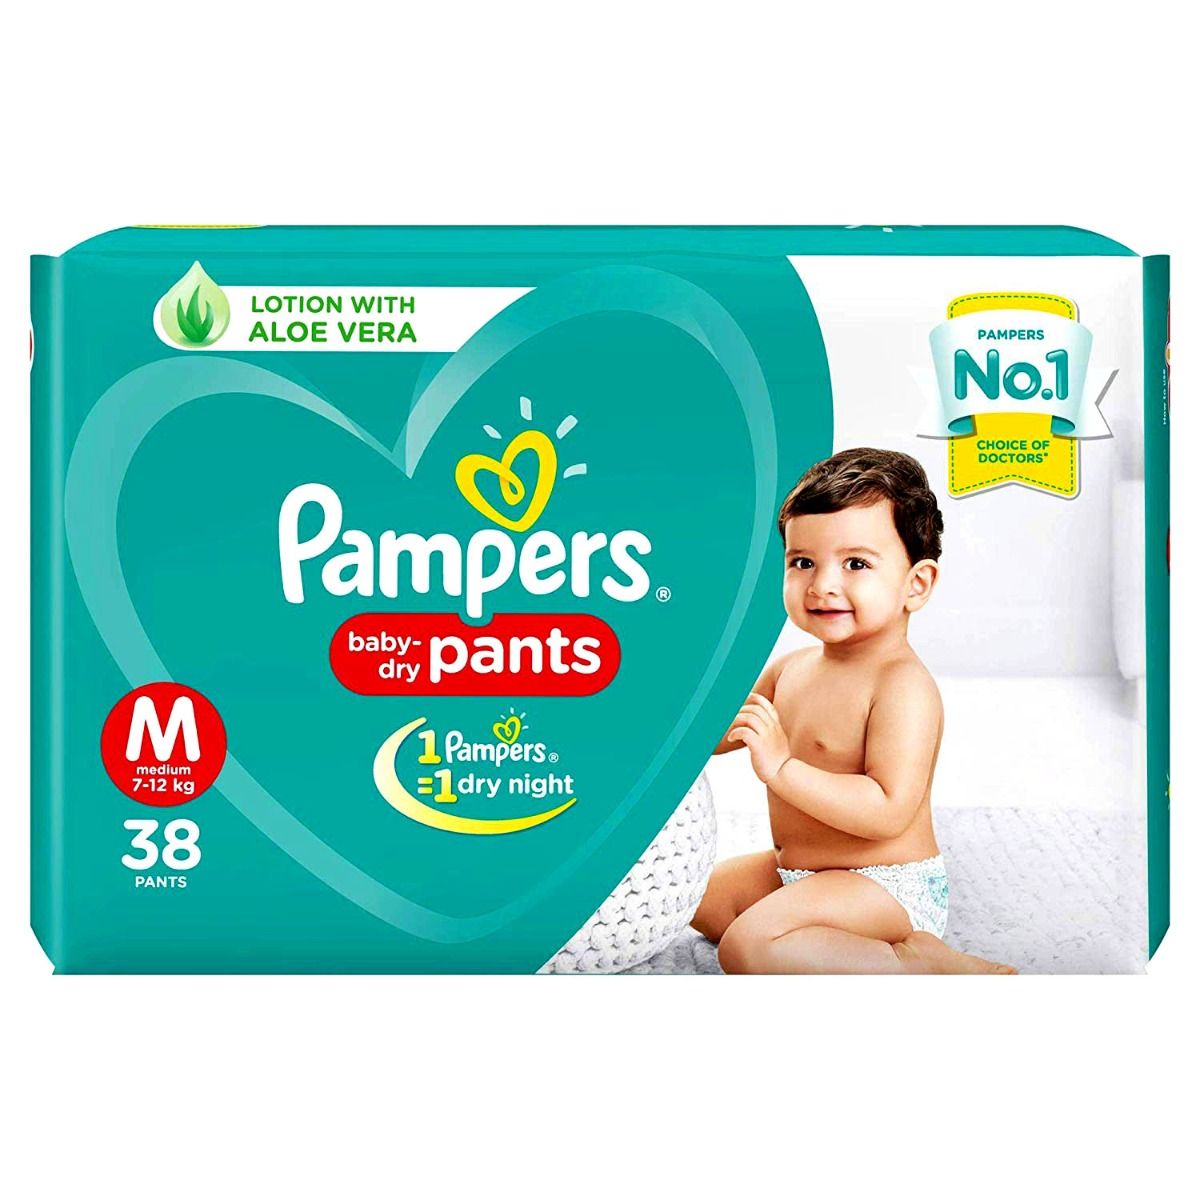 Pampers Baby Dry Pants Medium, 38's Price, Uses, Side Effects ...